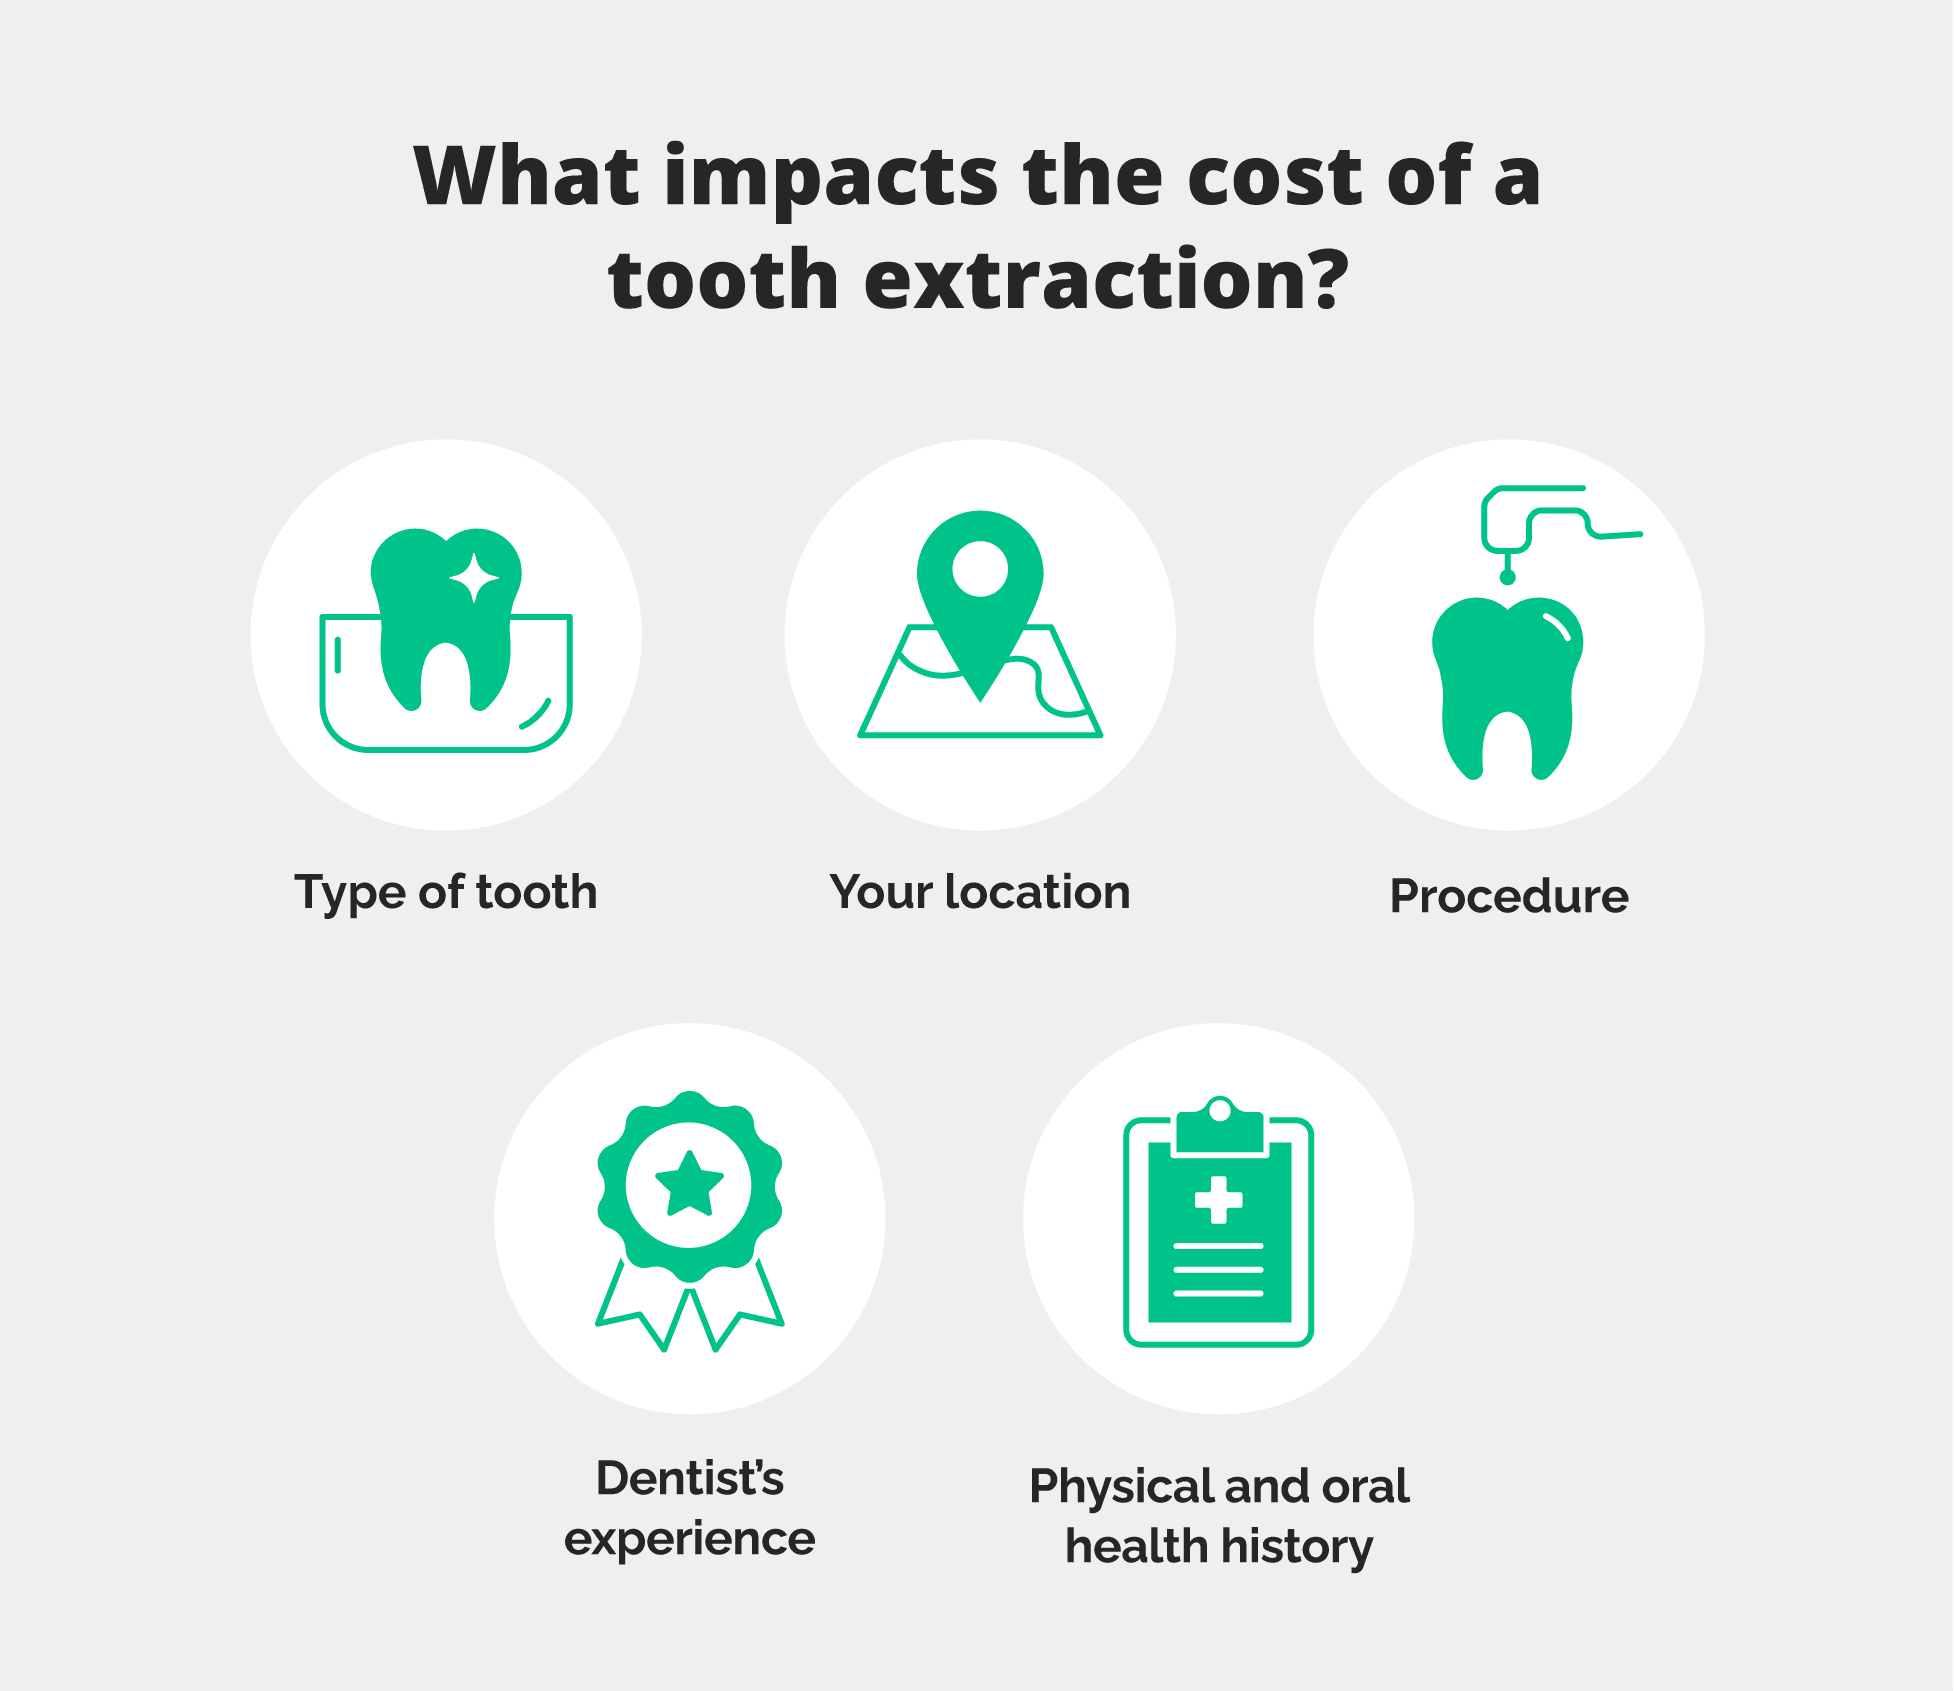 Illustration: What impacts the cost of a tooth extraction - Type of tooth; location; procedure; dentist experience; oral health history